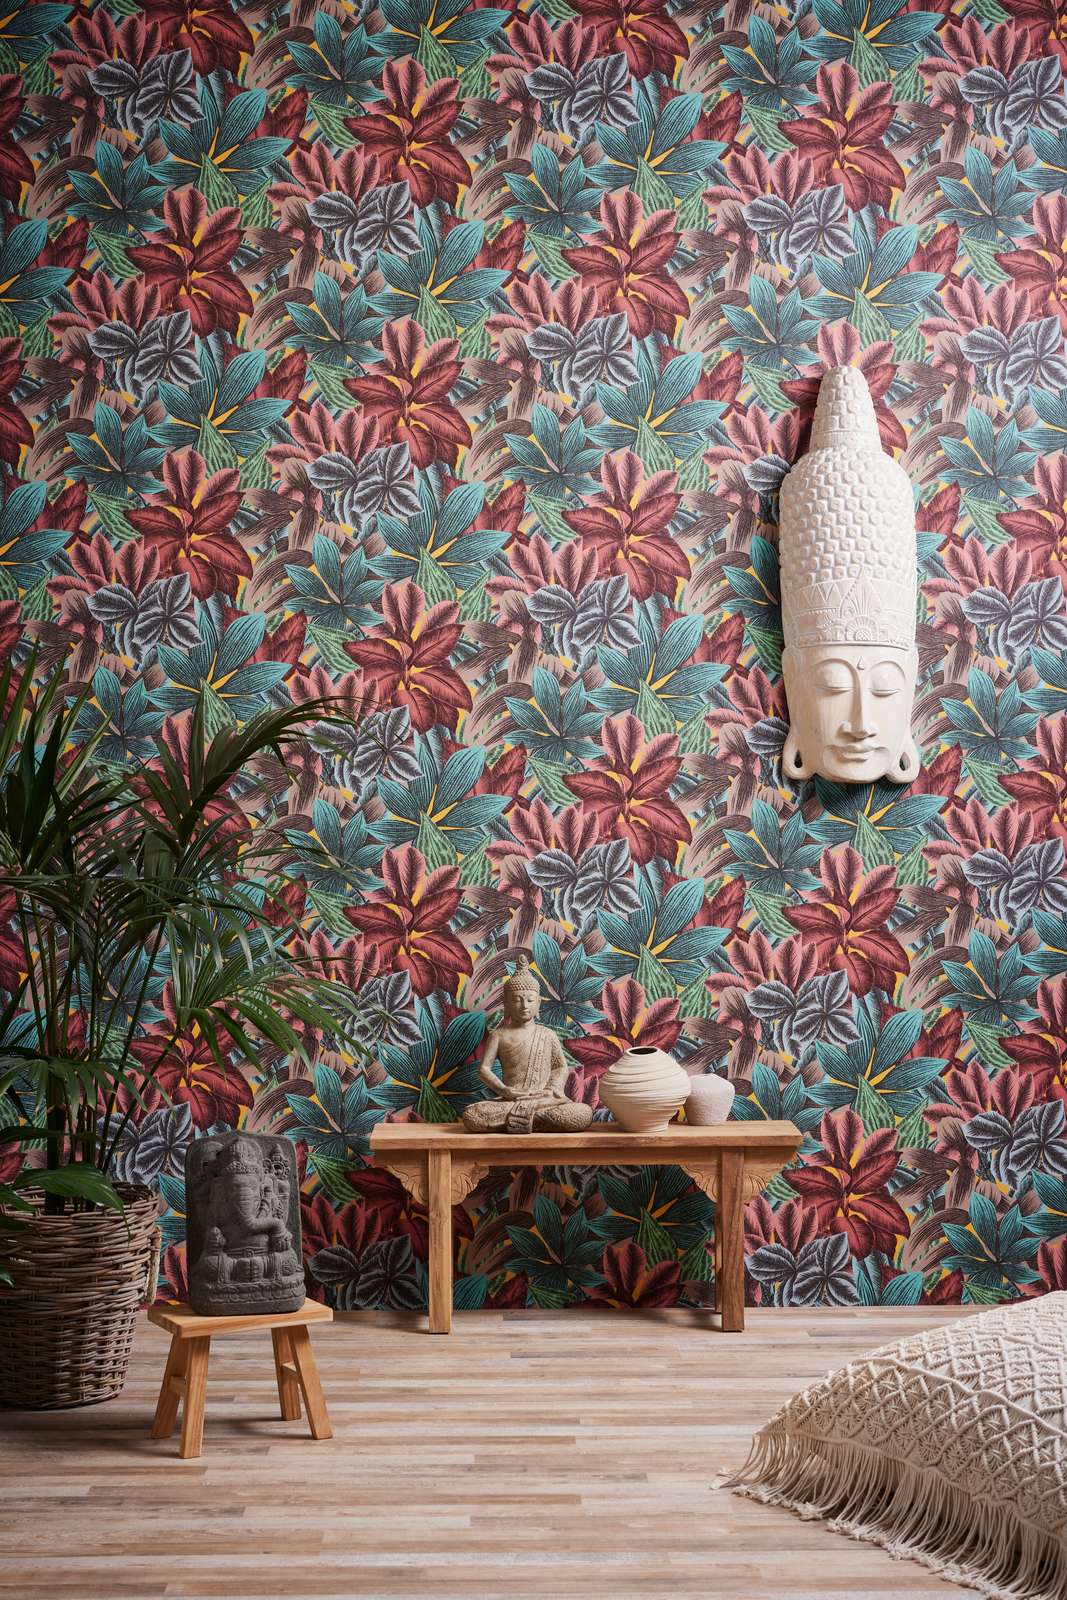             Non-woven wallpaper with leaf pattern in bright colours - multicoloured, blue, pink
        